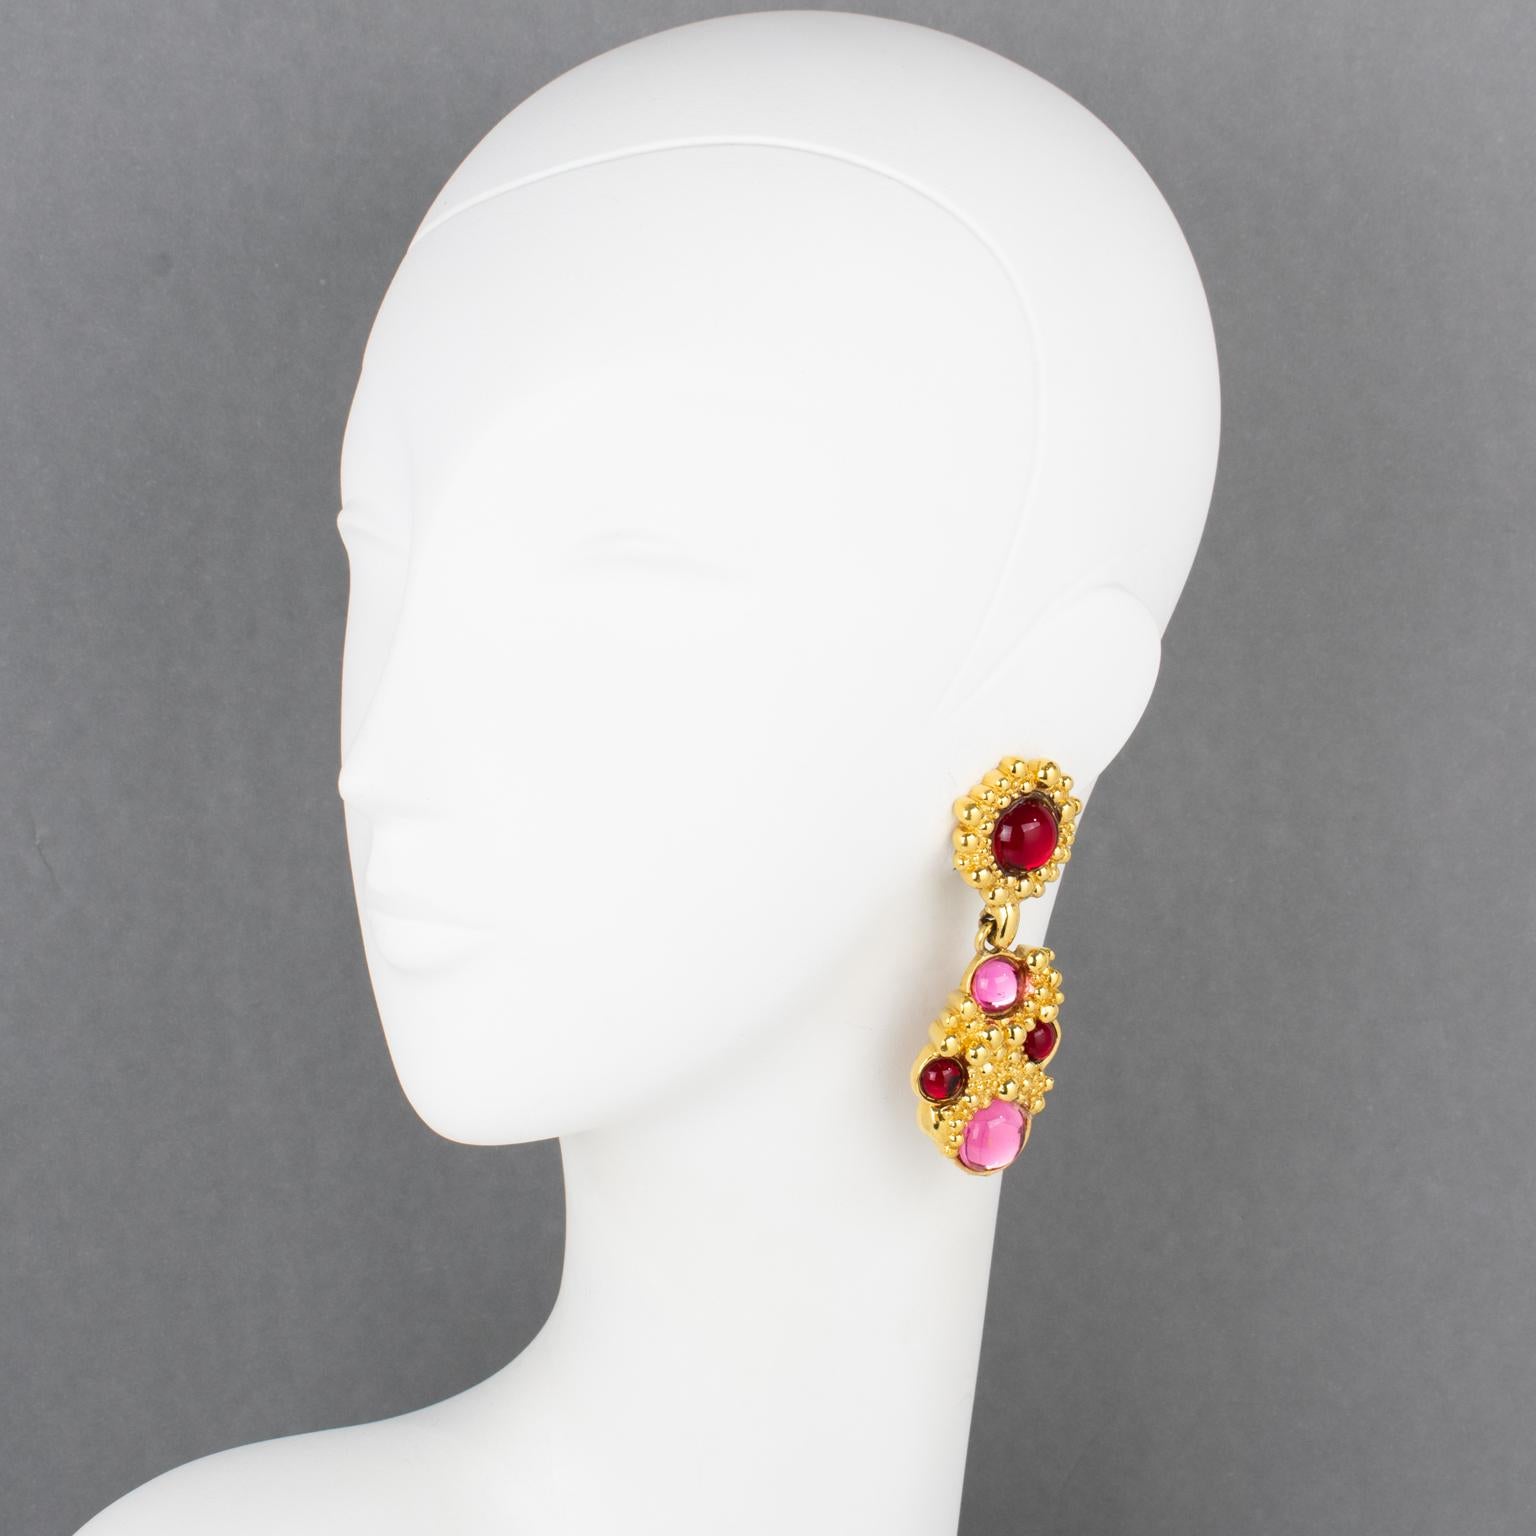 Guy Laroche Paris designed these elegant clip-on earrings. They feature a dangling shape with carved and textured gilded metal framing, ornate with ruby red and hot pink colored Gripoix poured glass cabochons. The Guy Laroche brand logo is engraved